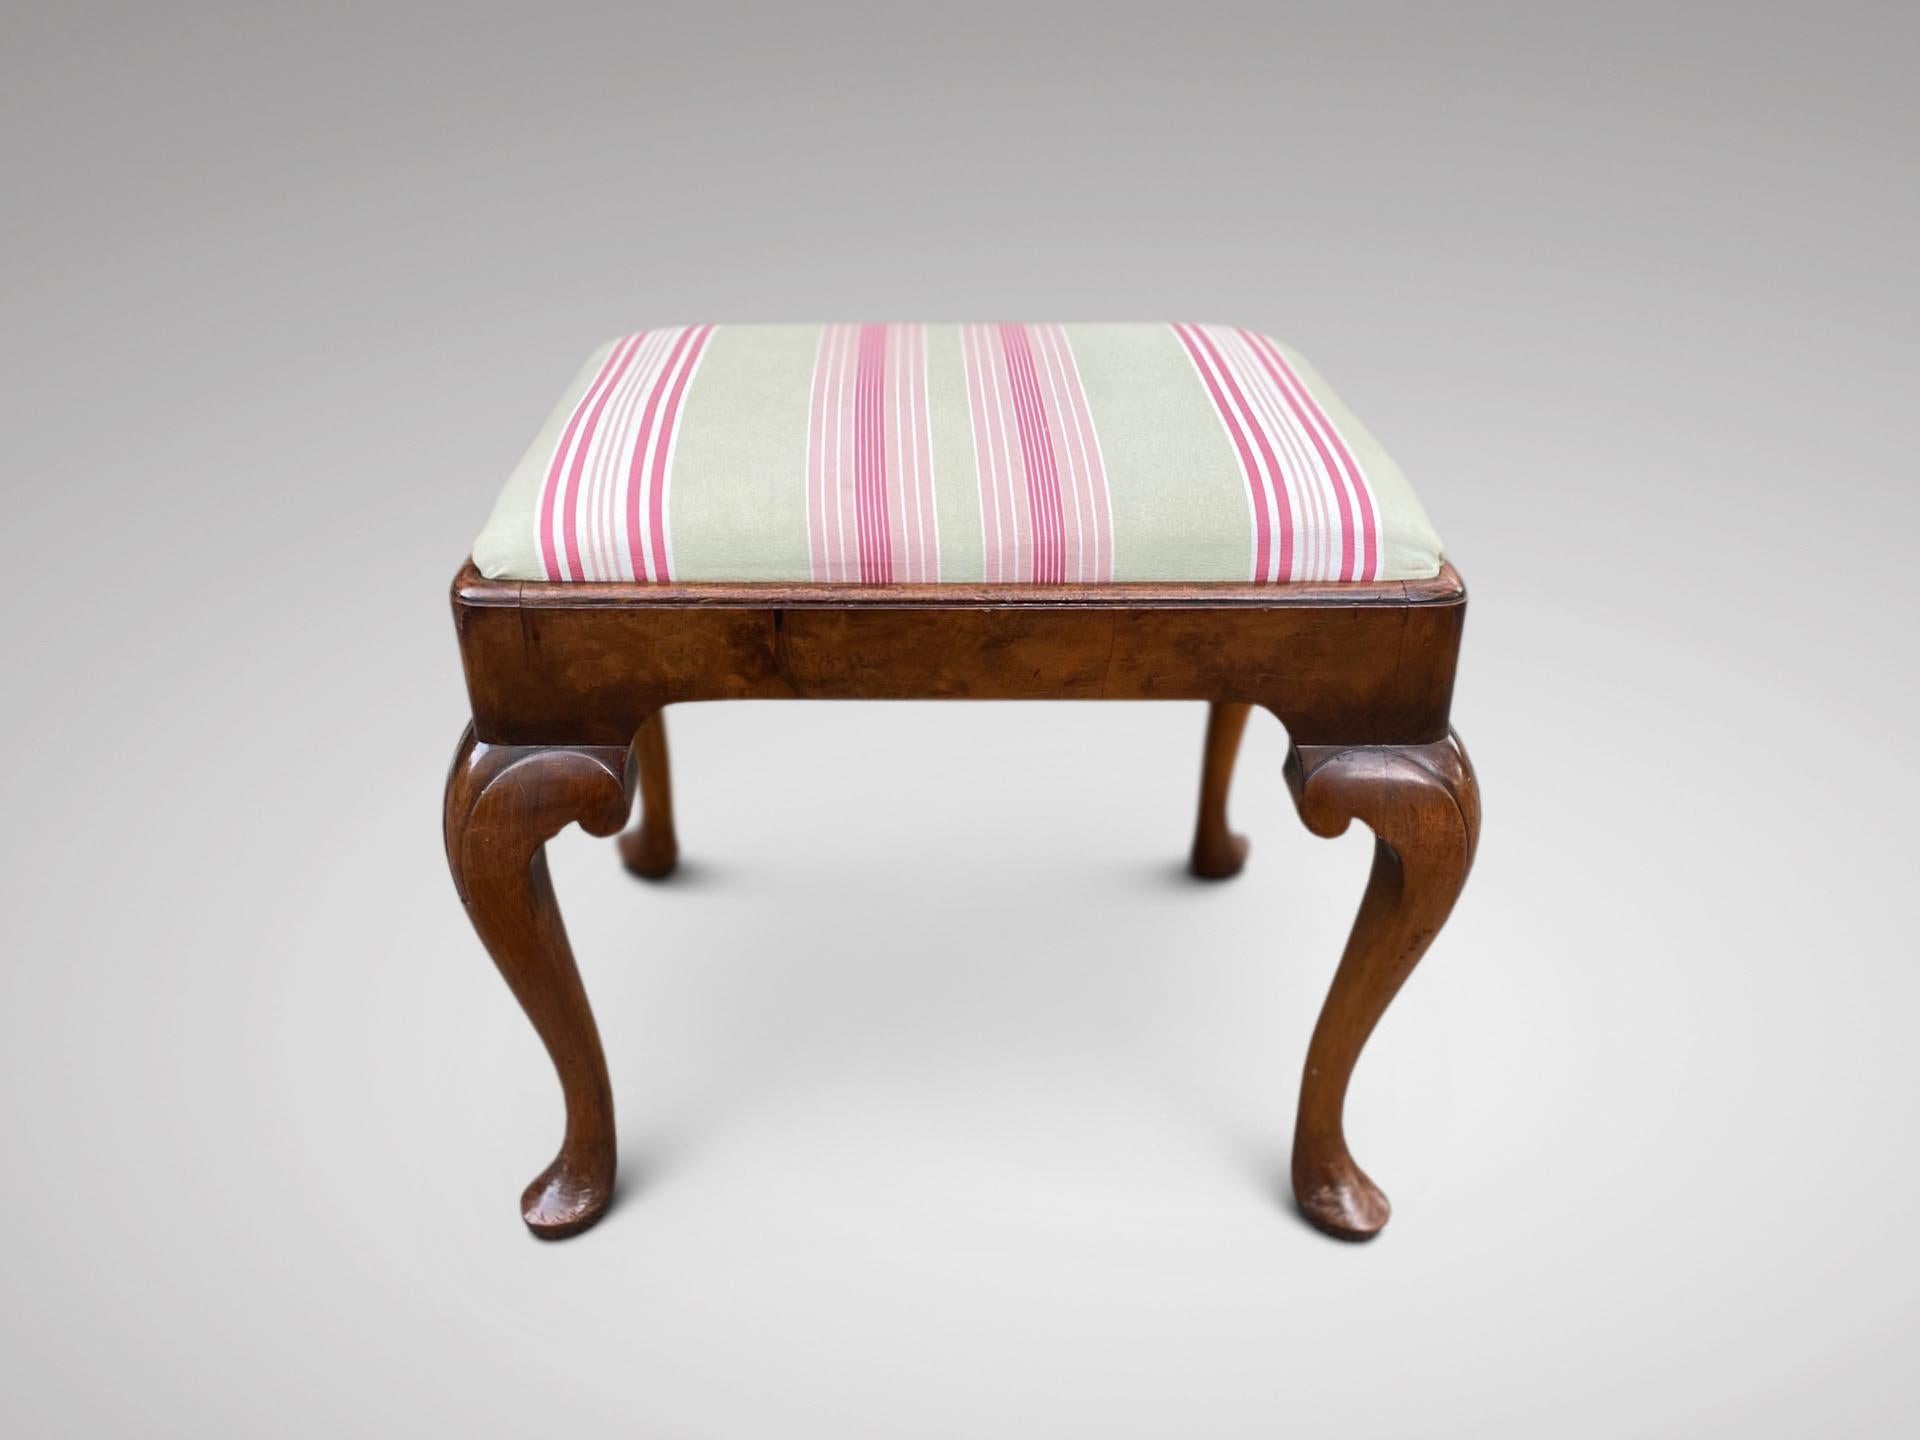 A 19th century Queen Anne style walnut dressing table stool. With an upholstered padded lift out seat. All supported by cabriole legs with minor carved decoration to the knee with pad feet. Circa 1860.

The dimensions are:
Height: 47cm